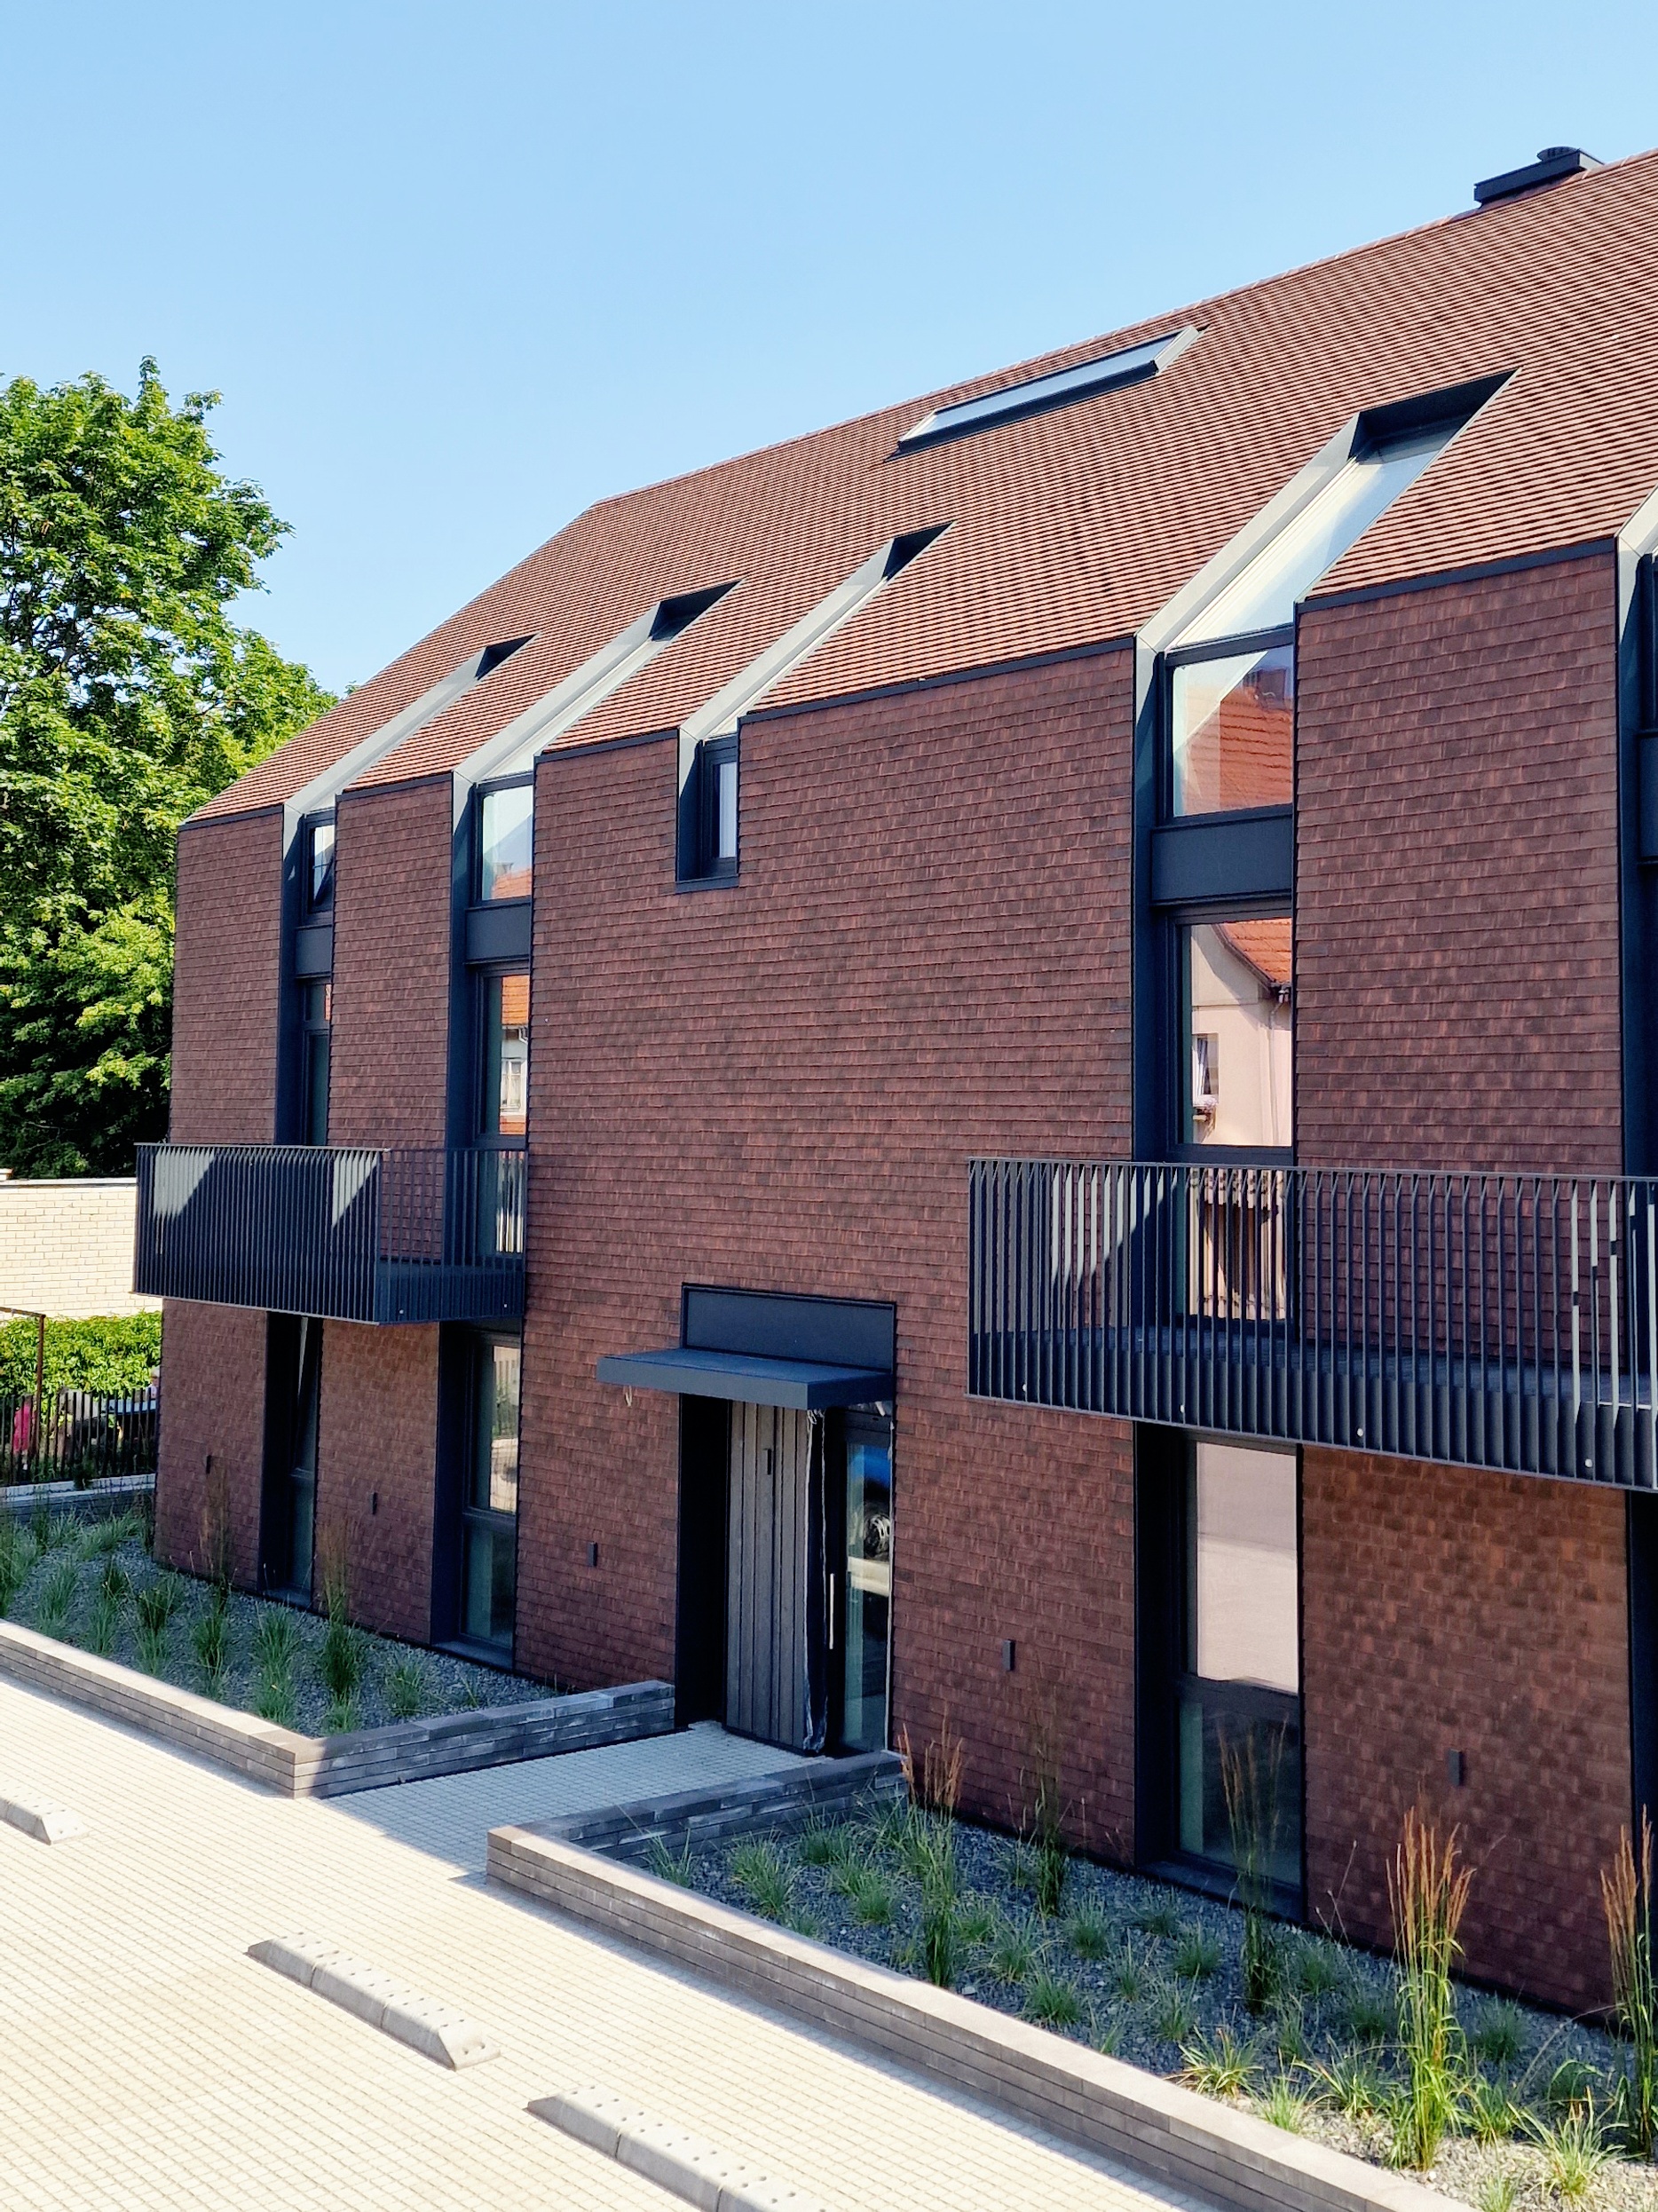 Marley acme double camber clay plain tiles installed on a large apartment building in Lithuania